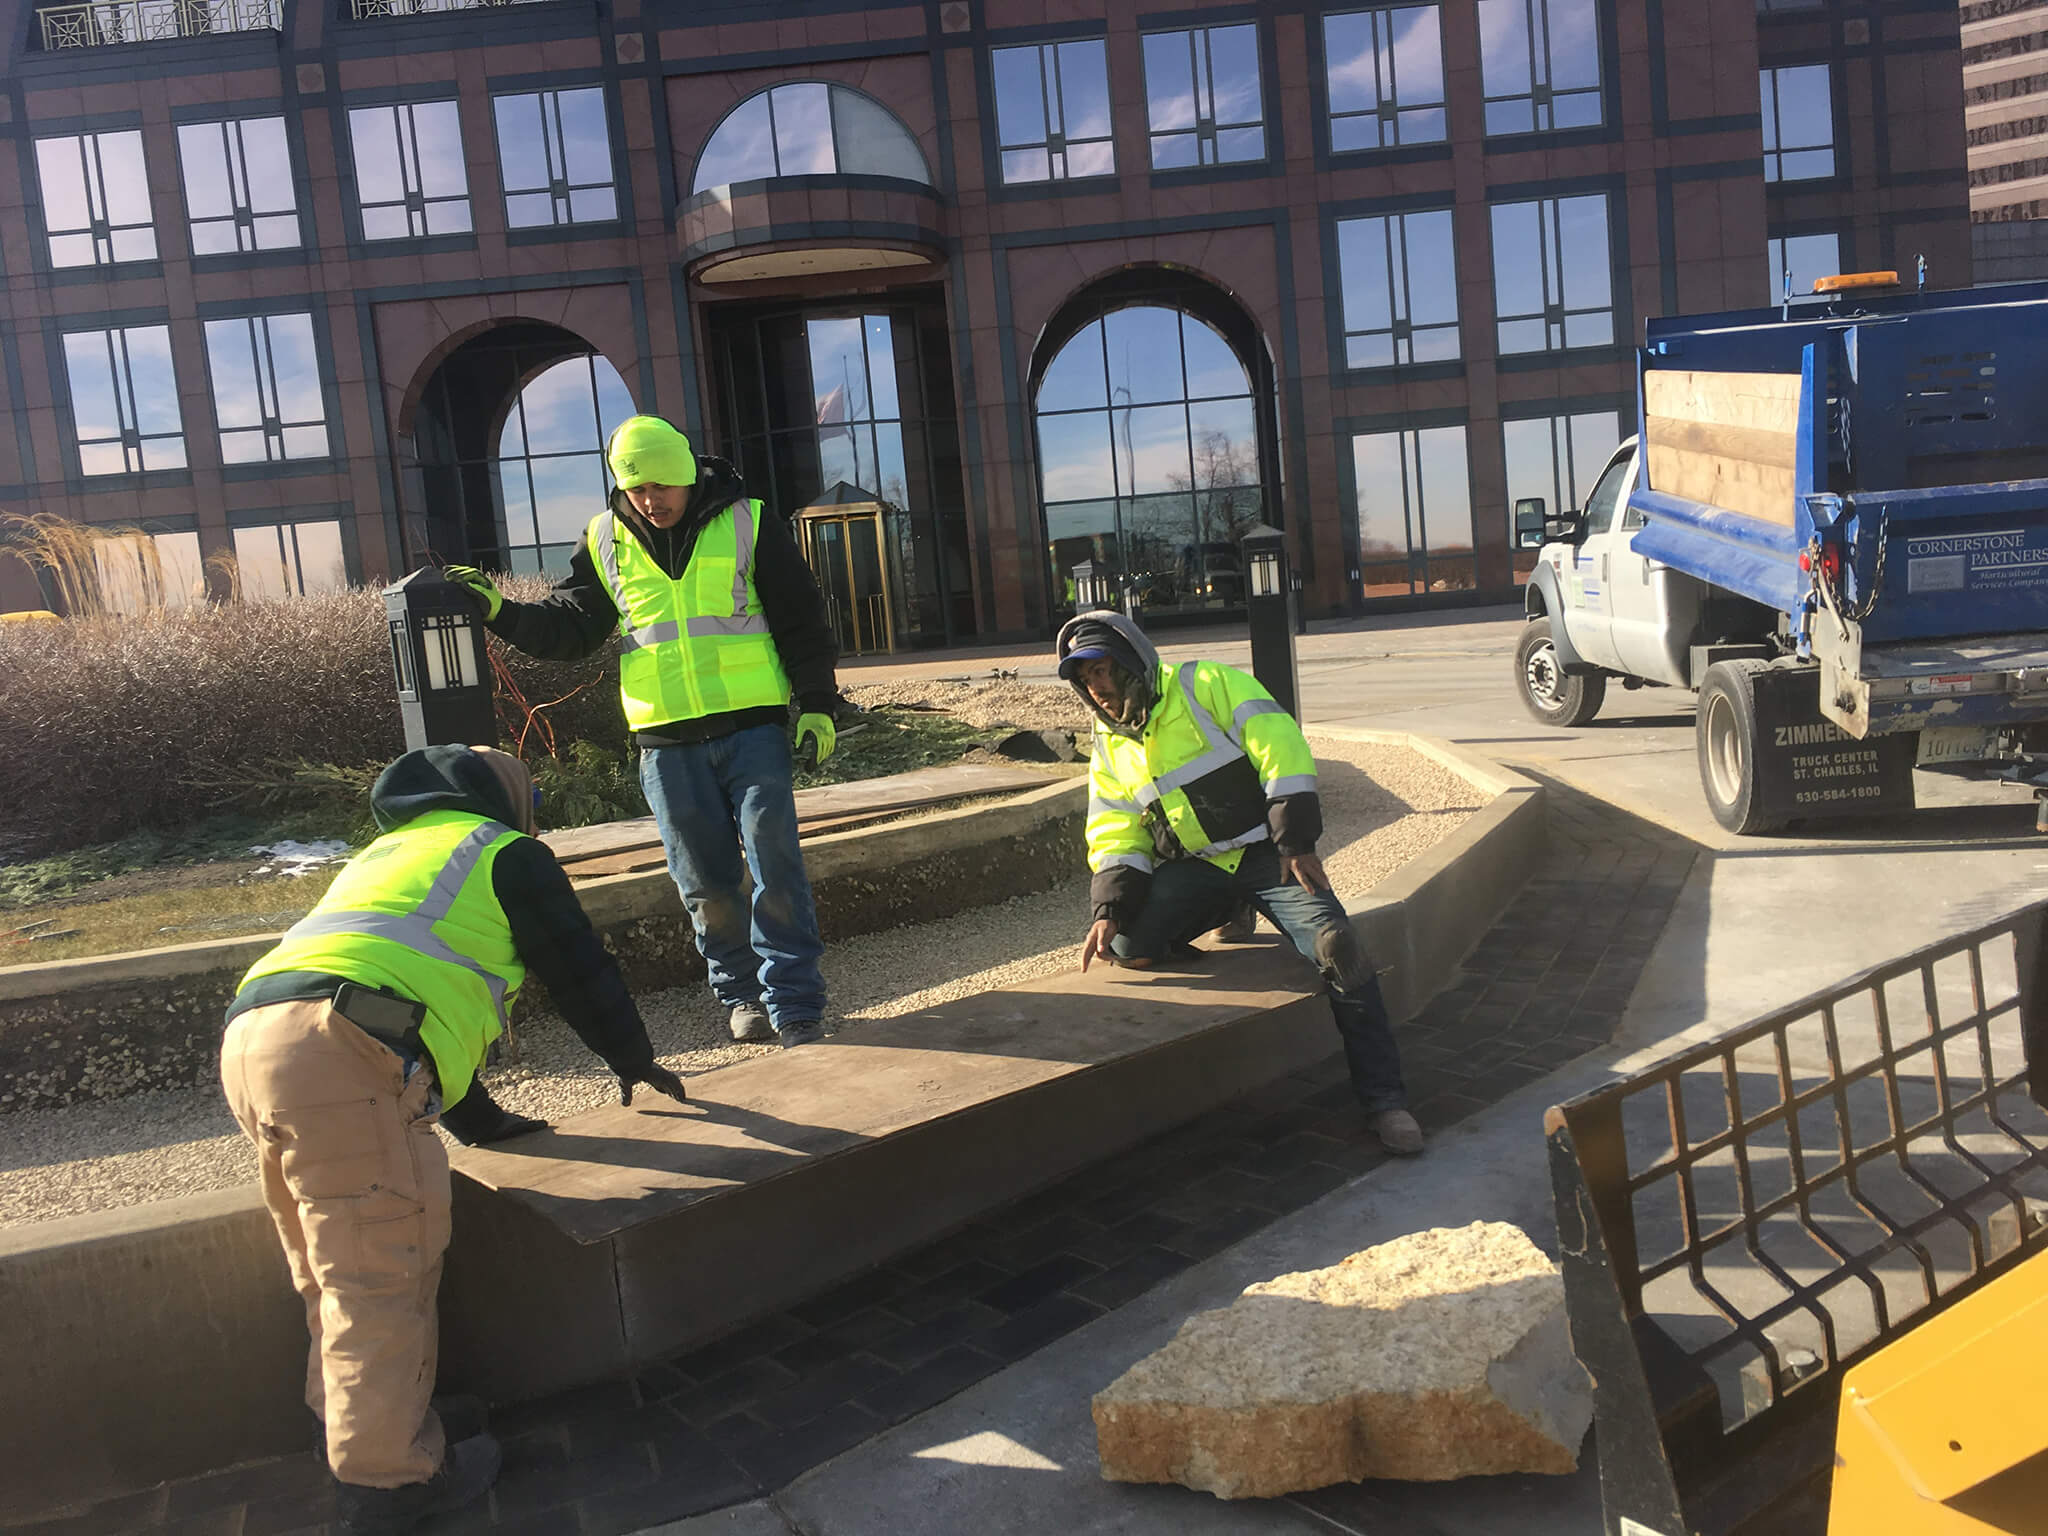 St. Charles, IL Commercial Landscape Installation